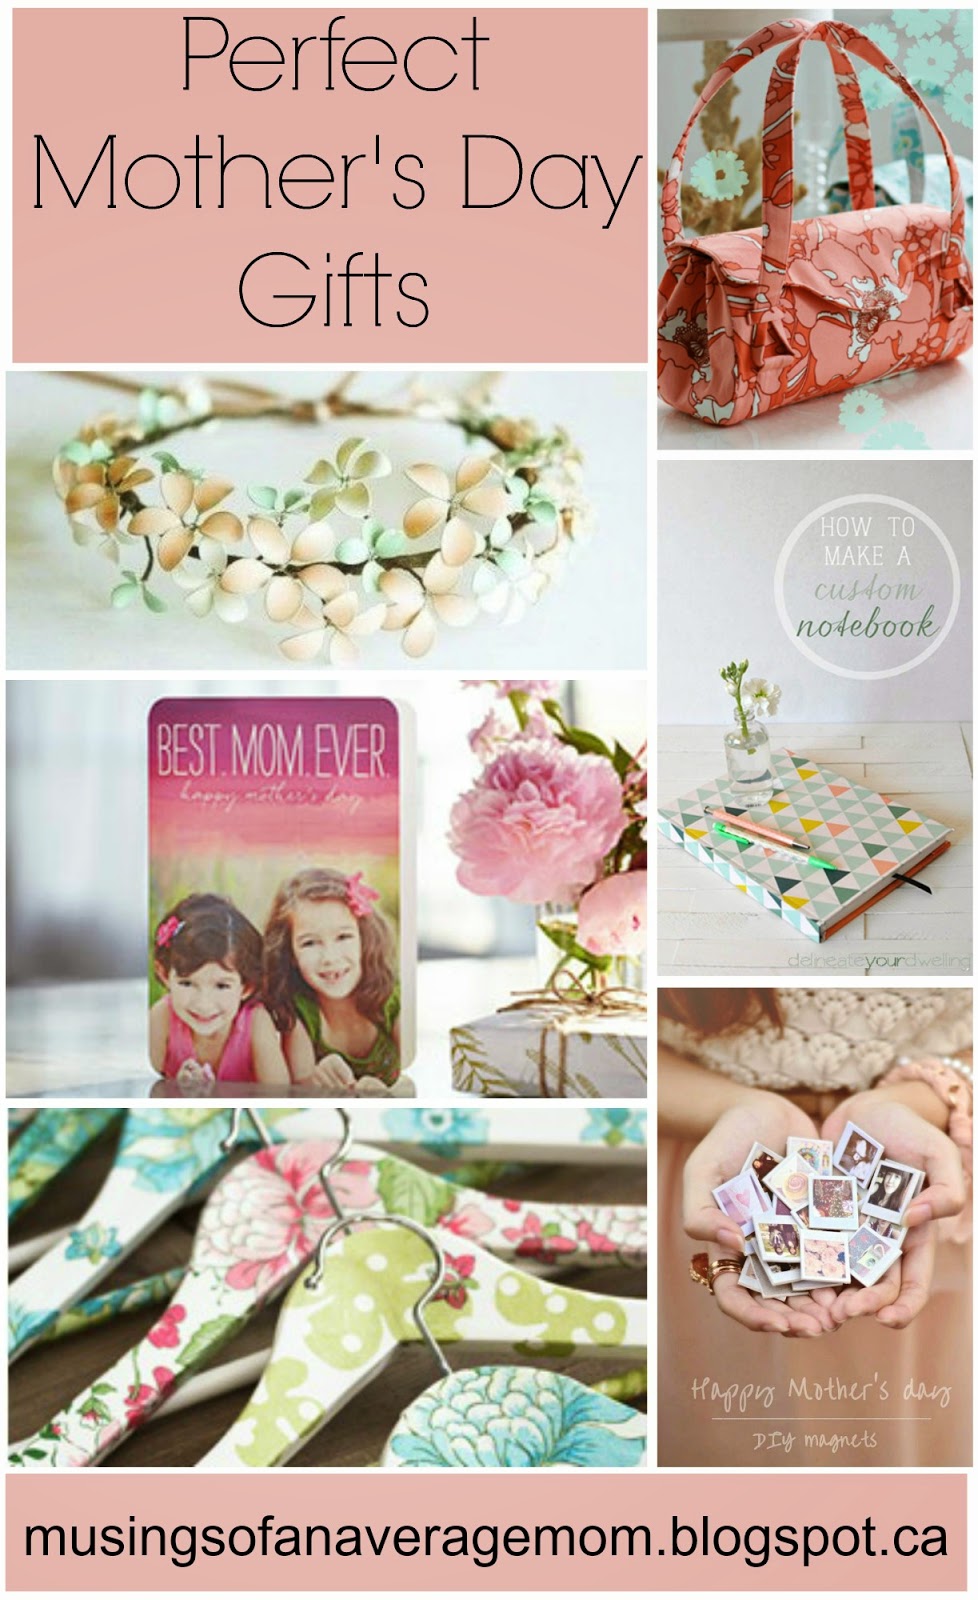 Mother's Day DIY + Handmade Gifts - Delineate Your Dwelling